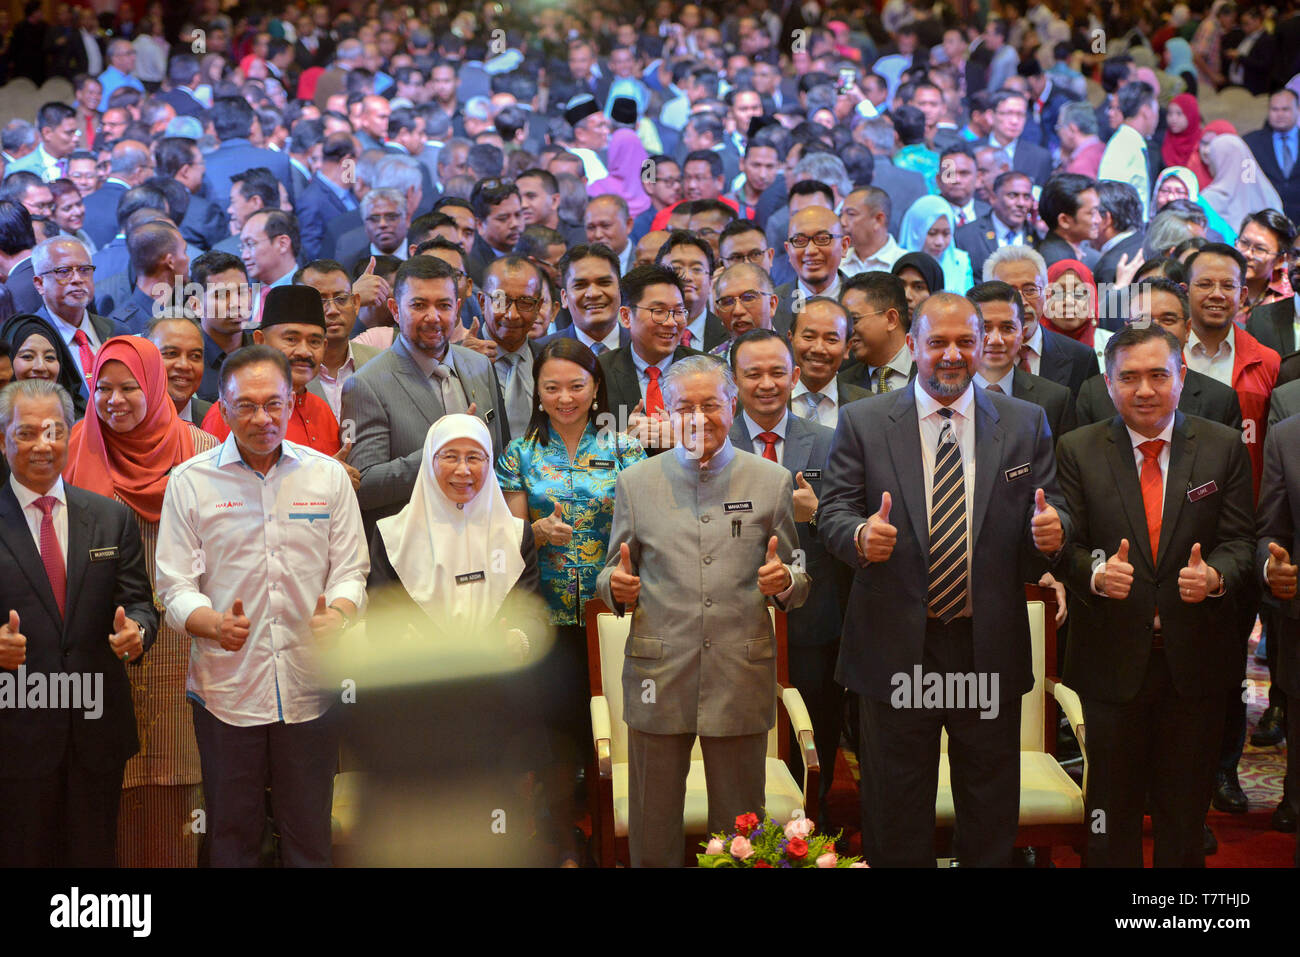 (190509) -- PUTRAJAYA, May 9, 2019 (Xinhua) -- Malaysian Prime Minister Mahathir Mohamad (3rd R, front) poses with his government ministers for photos at an event to mark the first year since his Pakatan Harapan (PH) coalition won power at the national polls on May 9 last year, in Putrajaya, Malaysia, May 9, 2019. Malaysia has achieved progress in combating corruption and in restoring government institutions after taking over the government in a smooth transition but much remains to be done especially in repairing the national economy, Malaysian Prime Minister Mahathir Mohamad said on Thursda Stock Photo